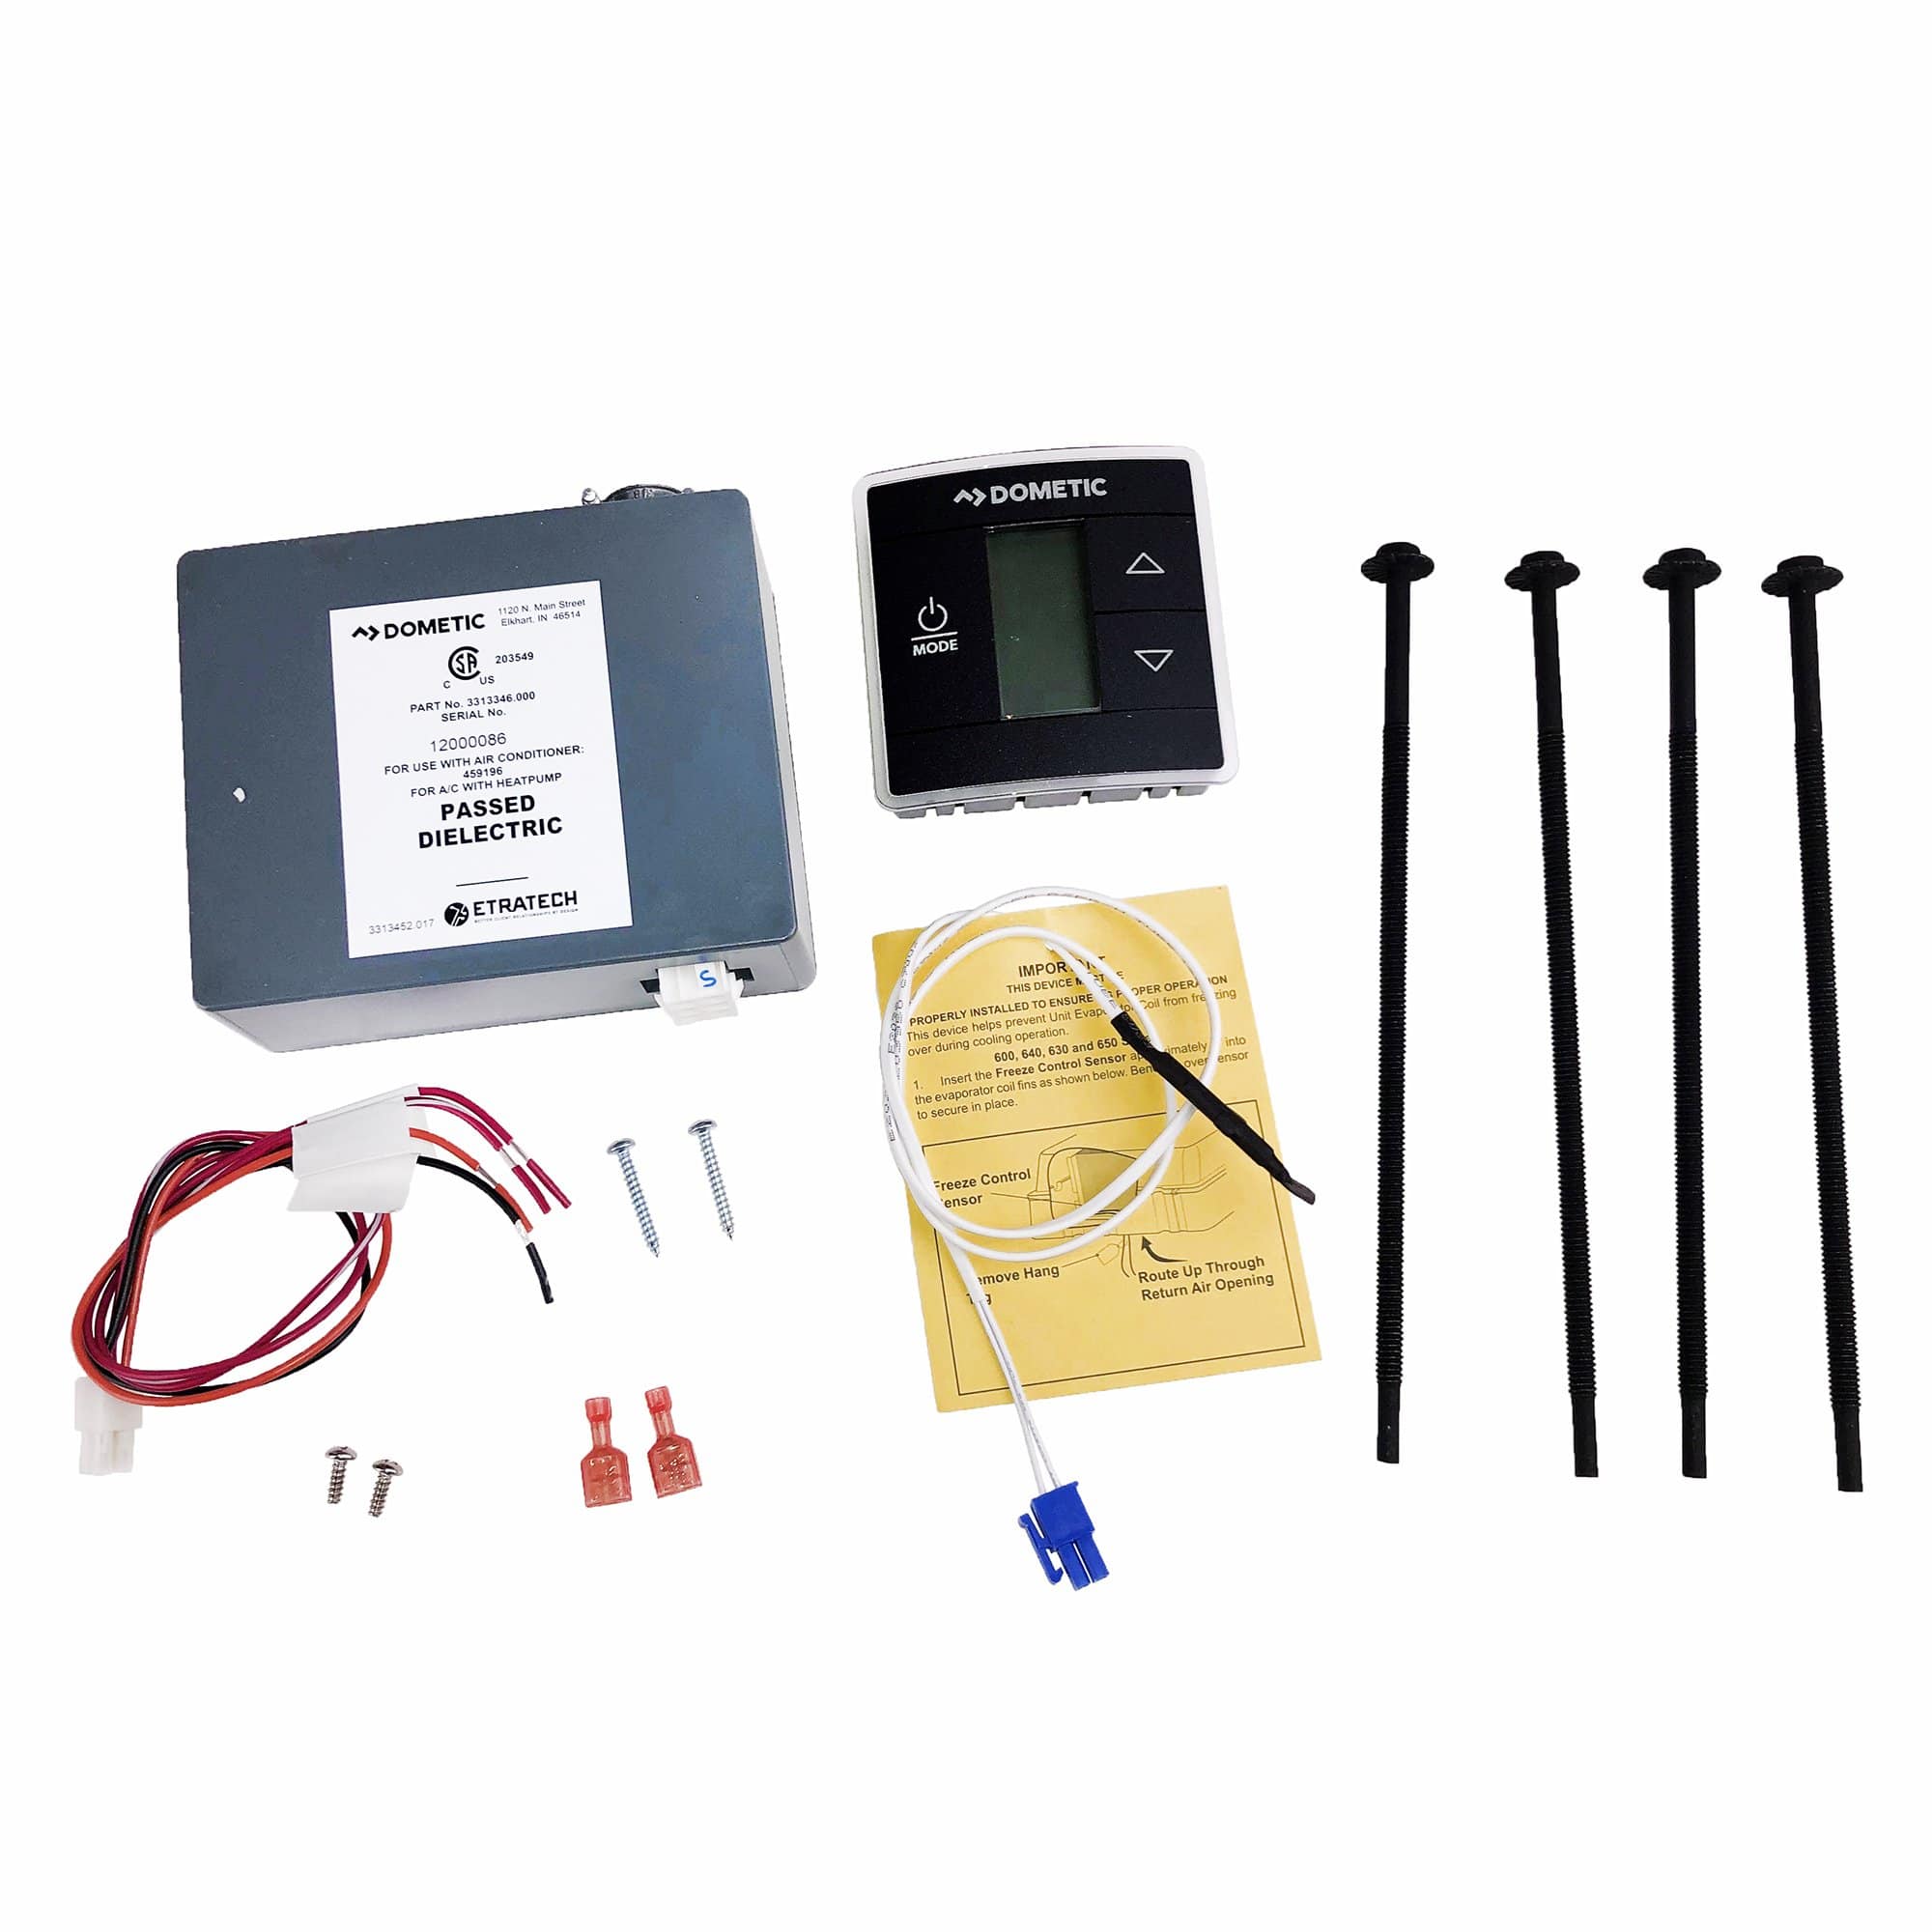 Dometic 3316234.016 Black Single Zone Control Kit and LCD Thermostat for Heat Pump Model 459196